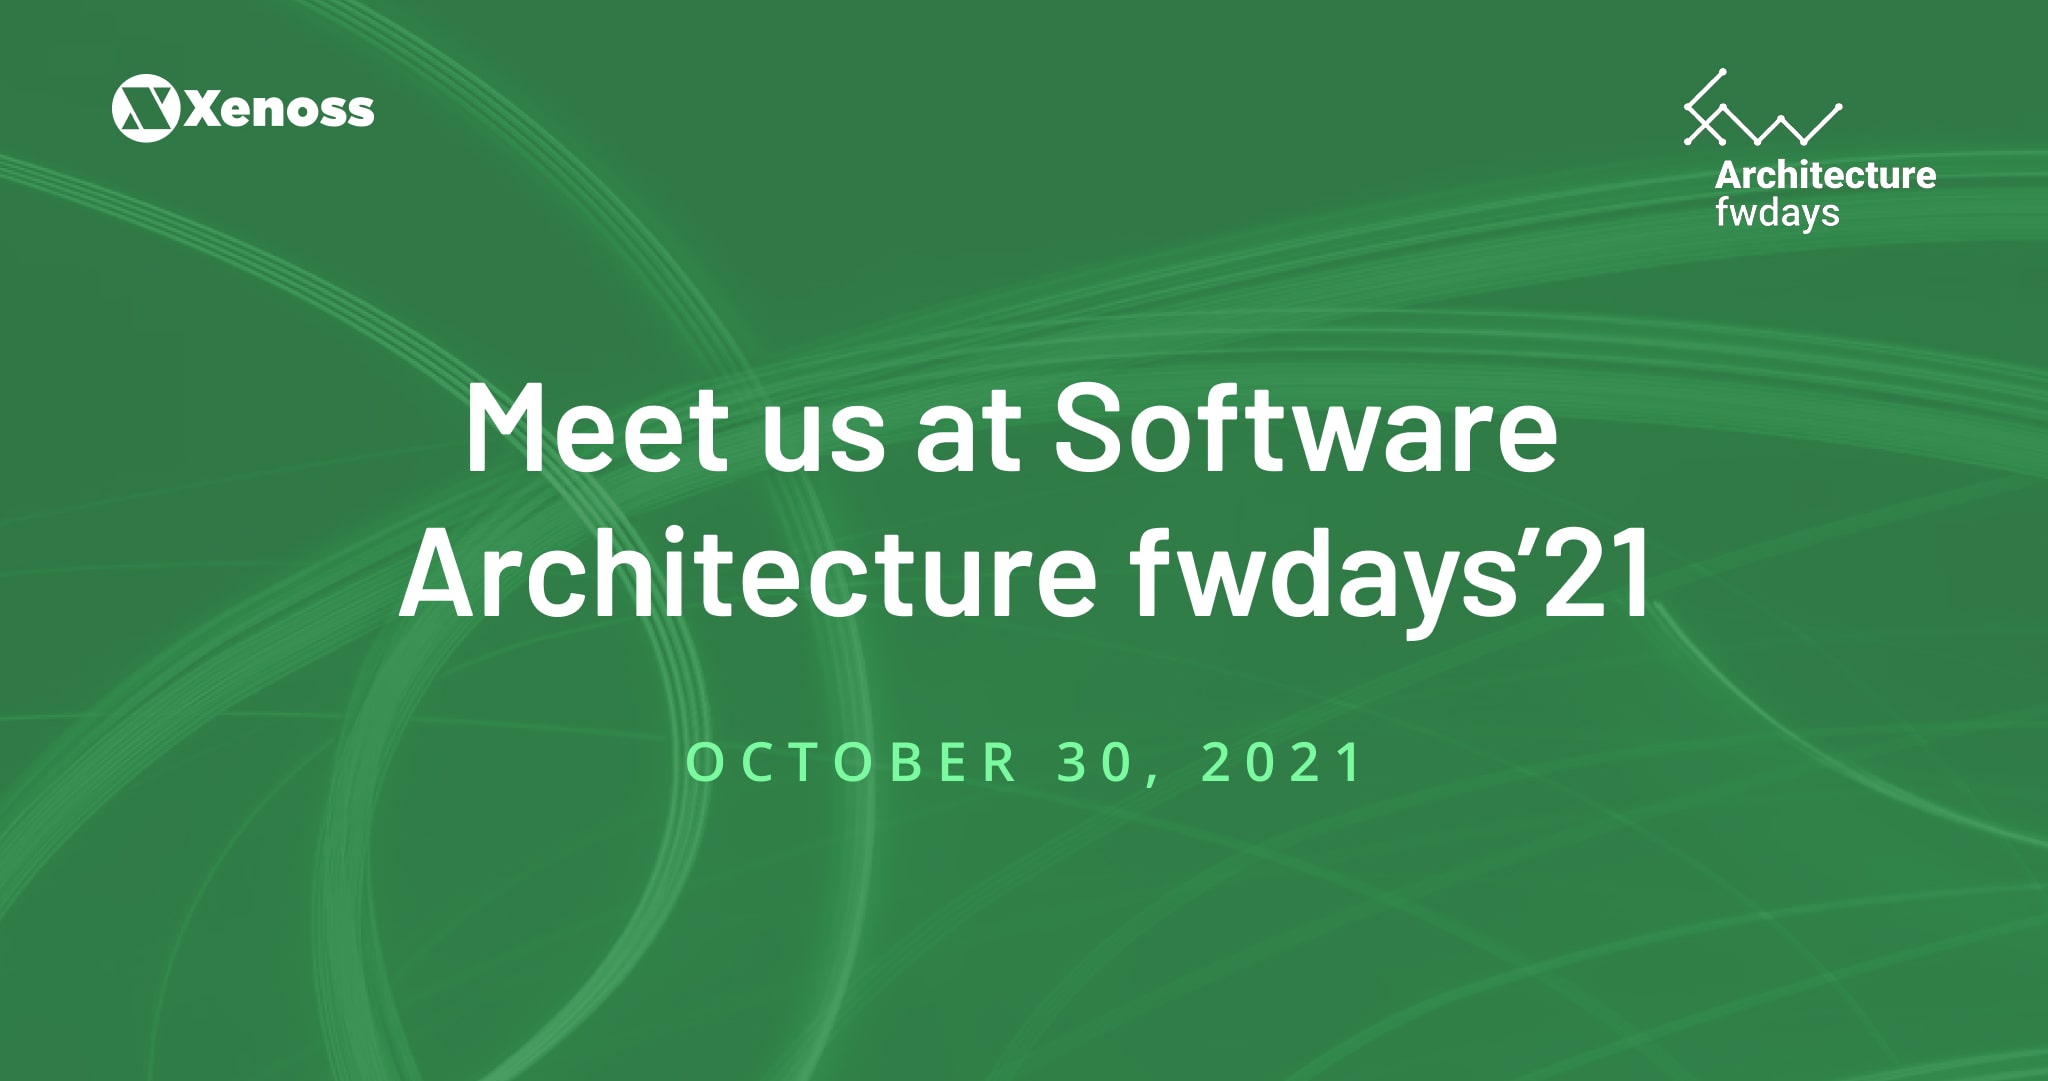 Xenoss at Software Architecture fwdays 2021